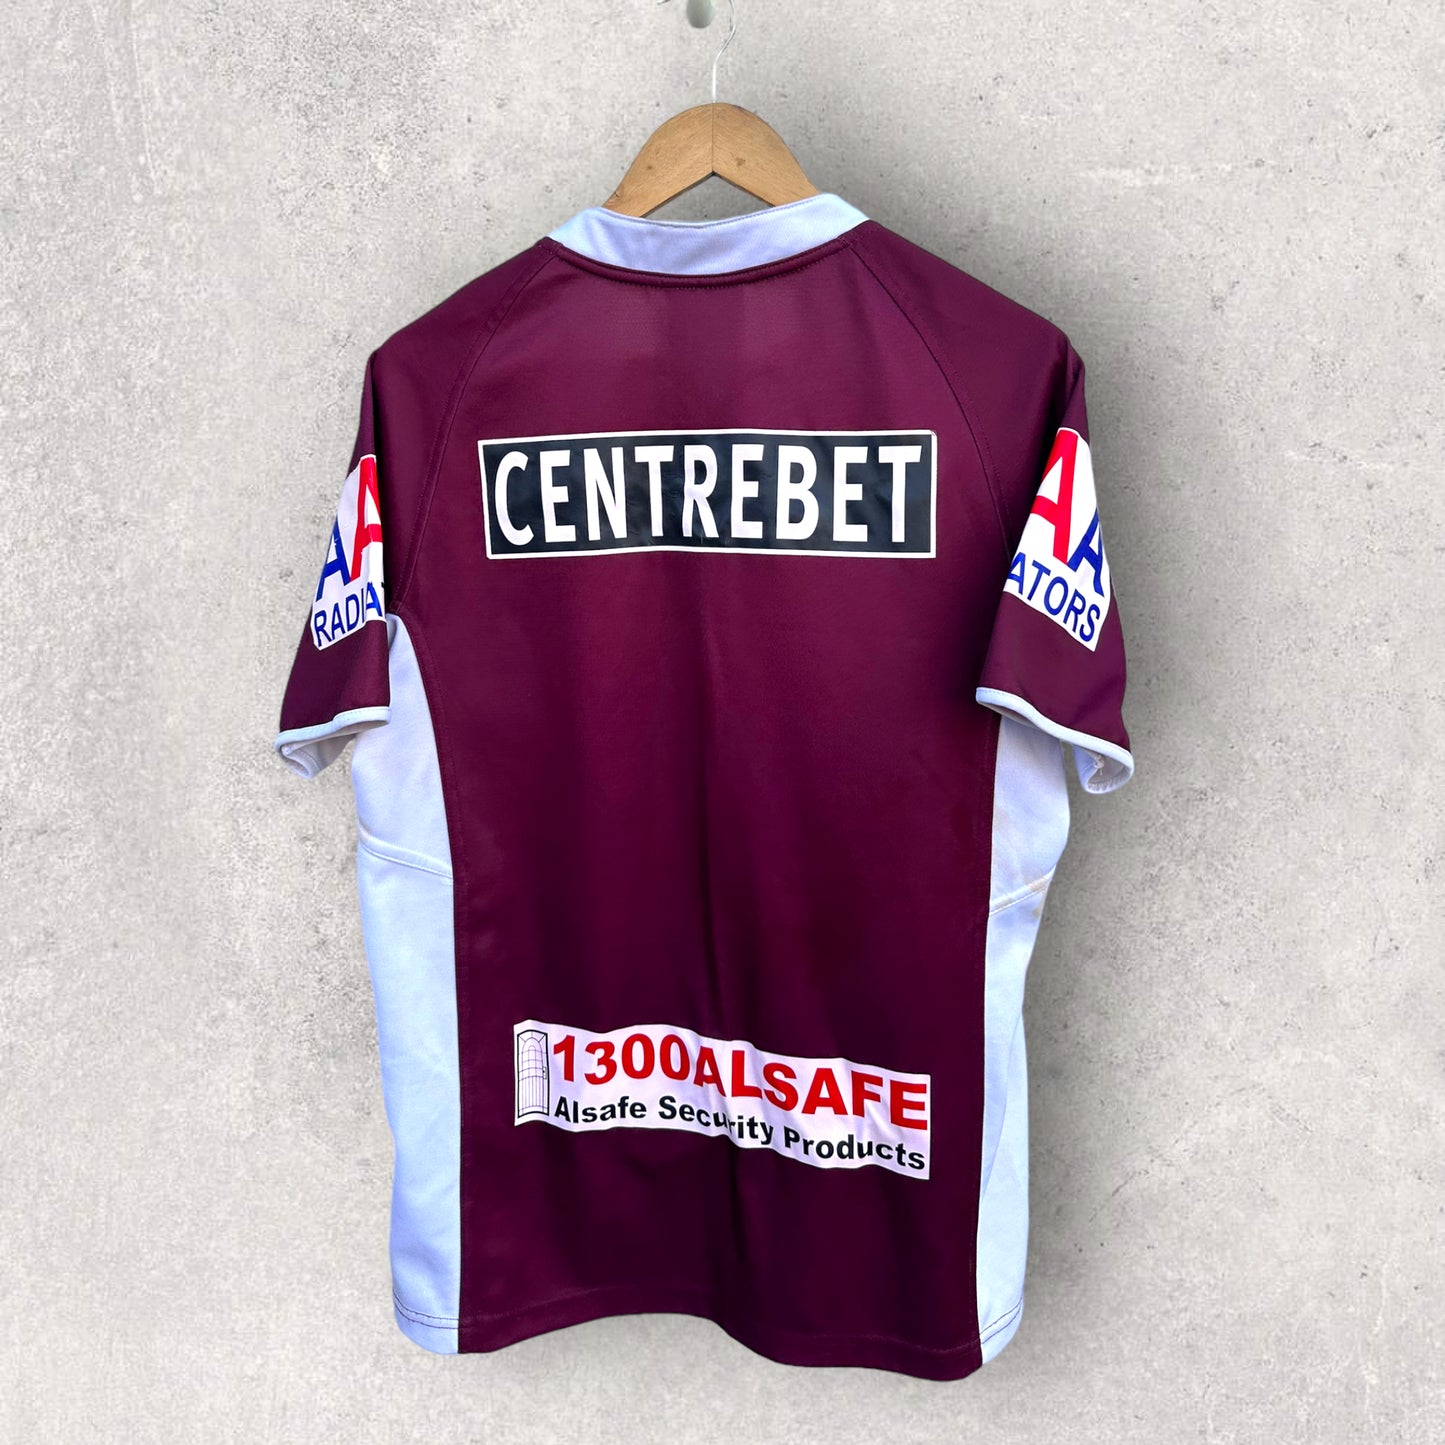 MANLY SEA EAGLES 2011 HOME JERSEY